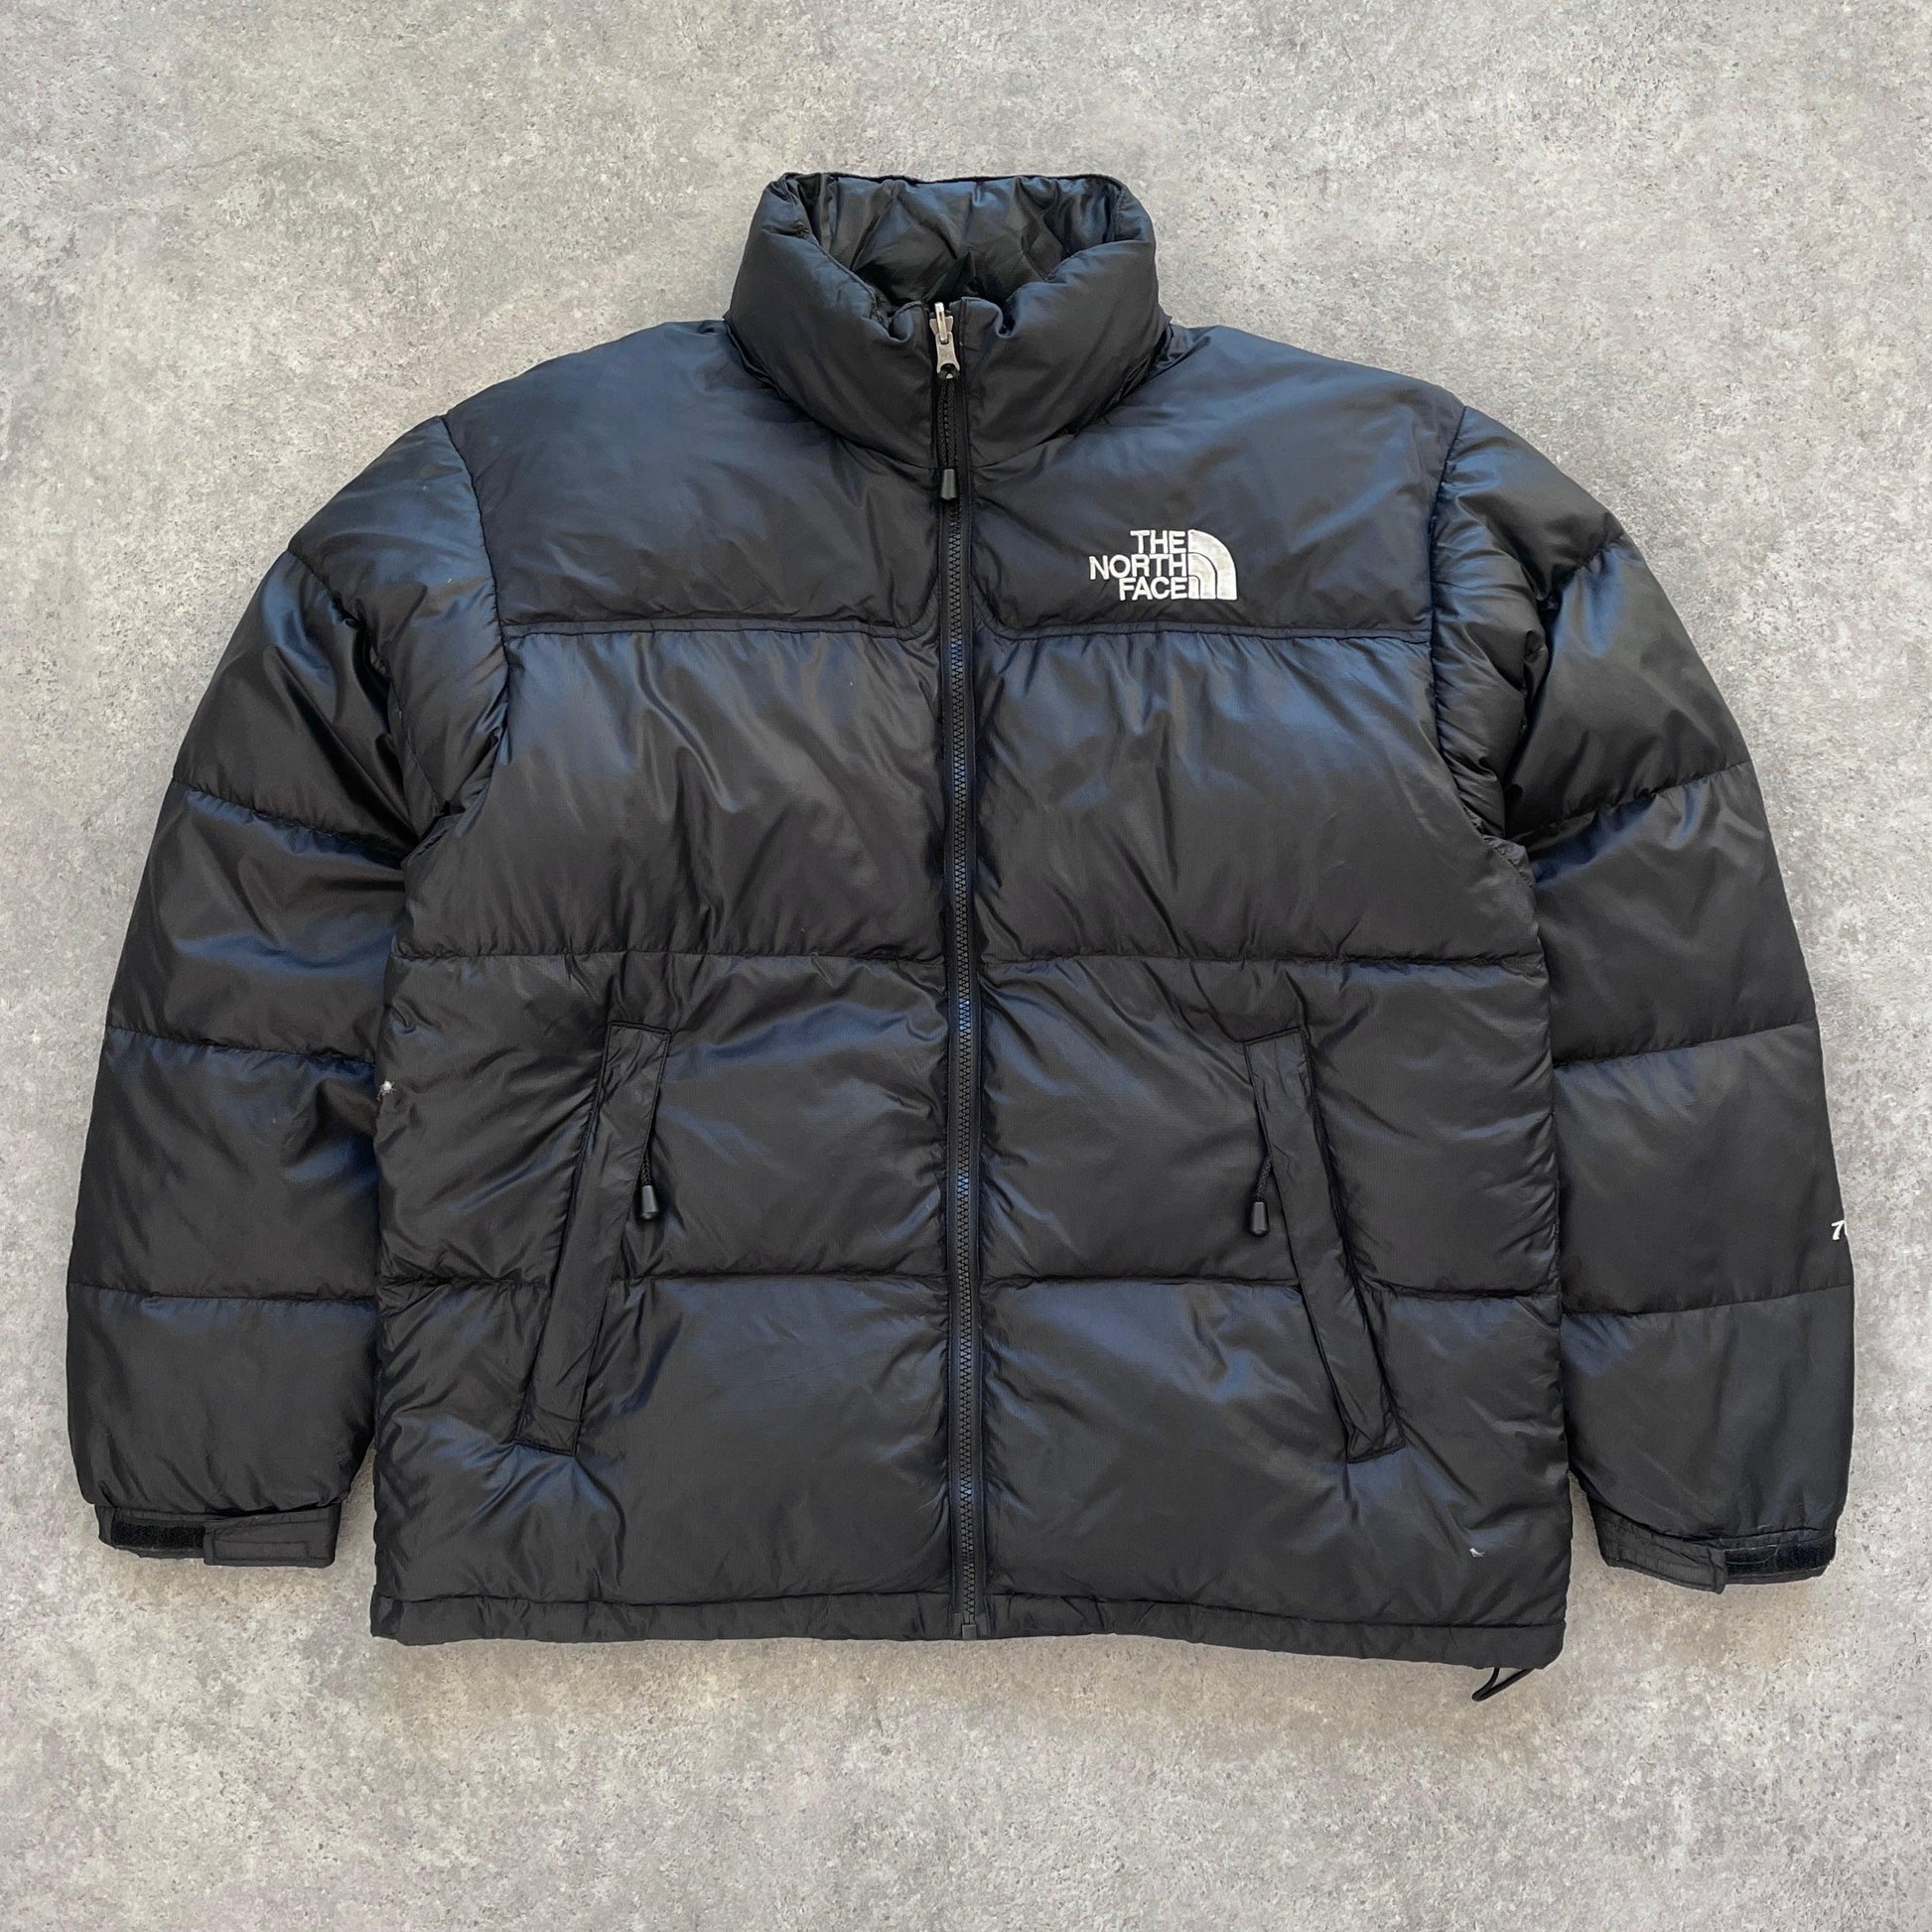 The North Face Nuptse 700 down fill puffer jacket (L) - Known Source